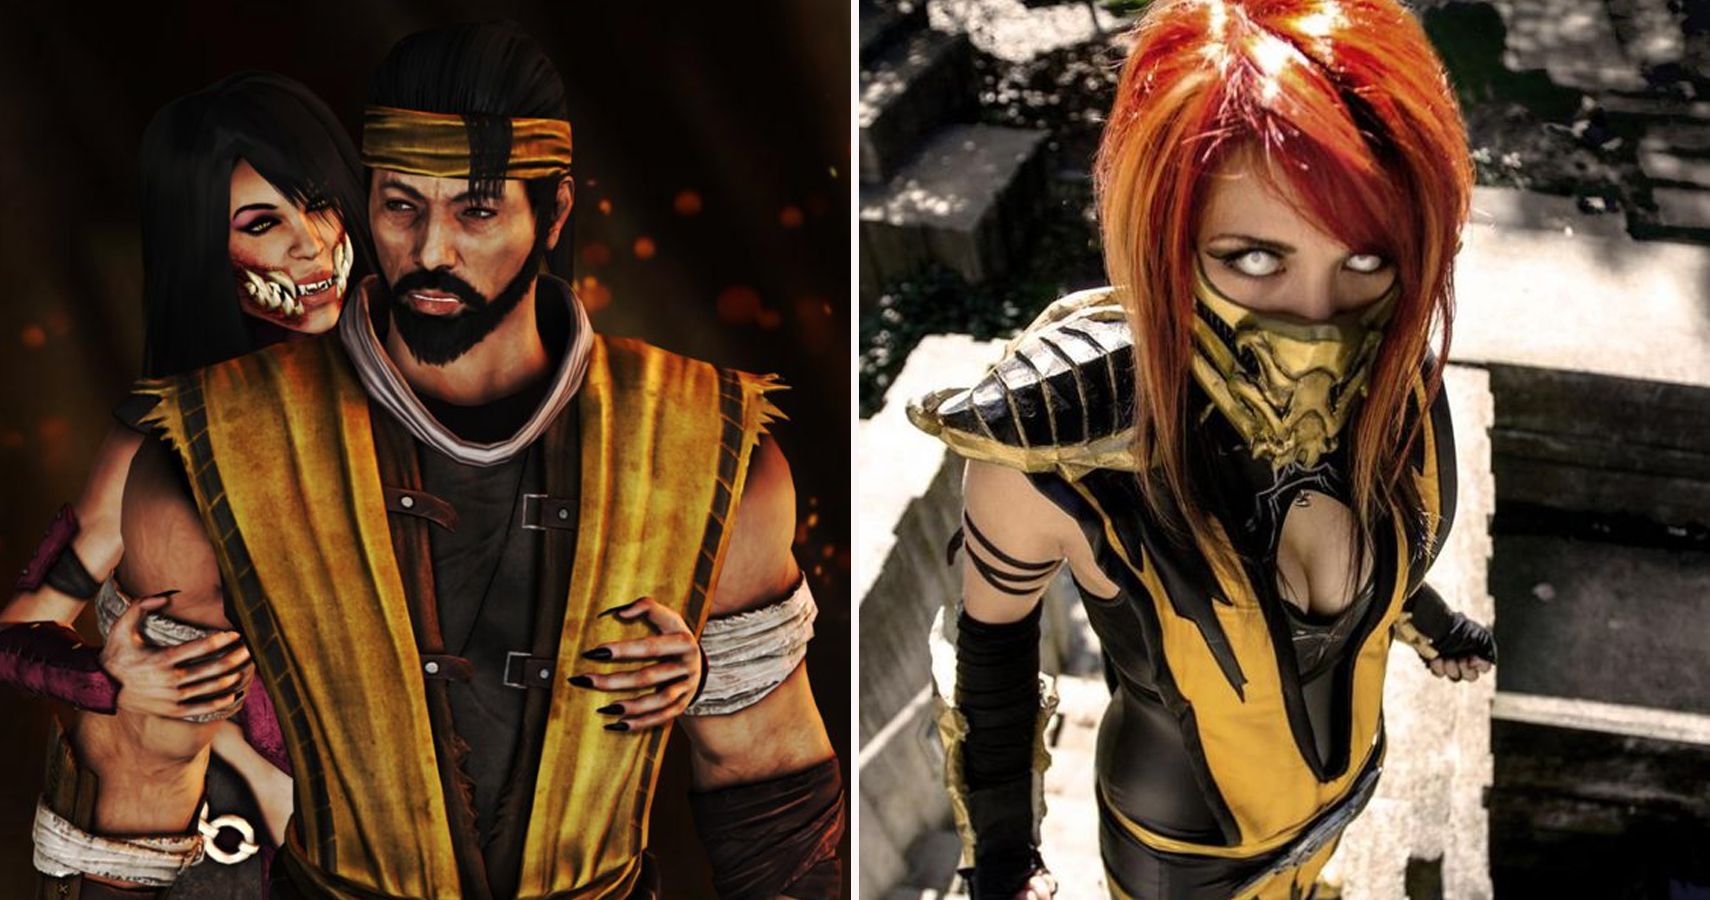 We all say Mortal Kombat is full of ninjas but really is only one major  ninjas in the entire game, Scorpion. The bio of the Lin Kuei is they're a  clan in